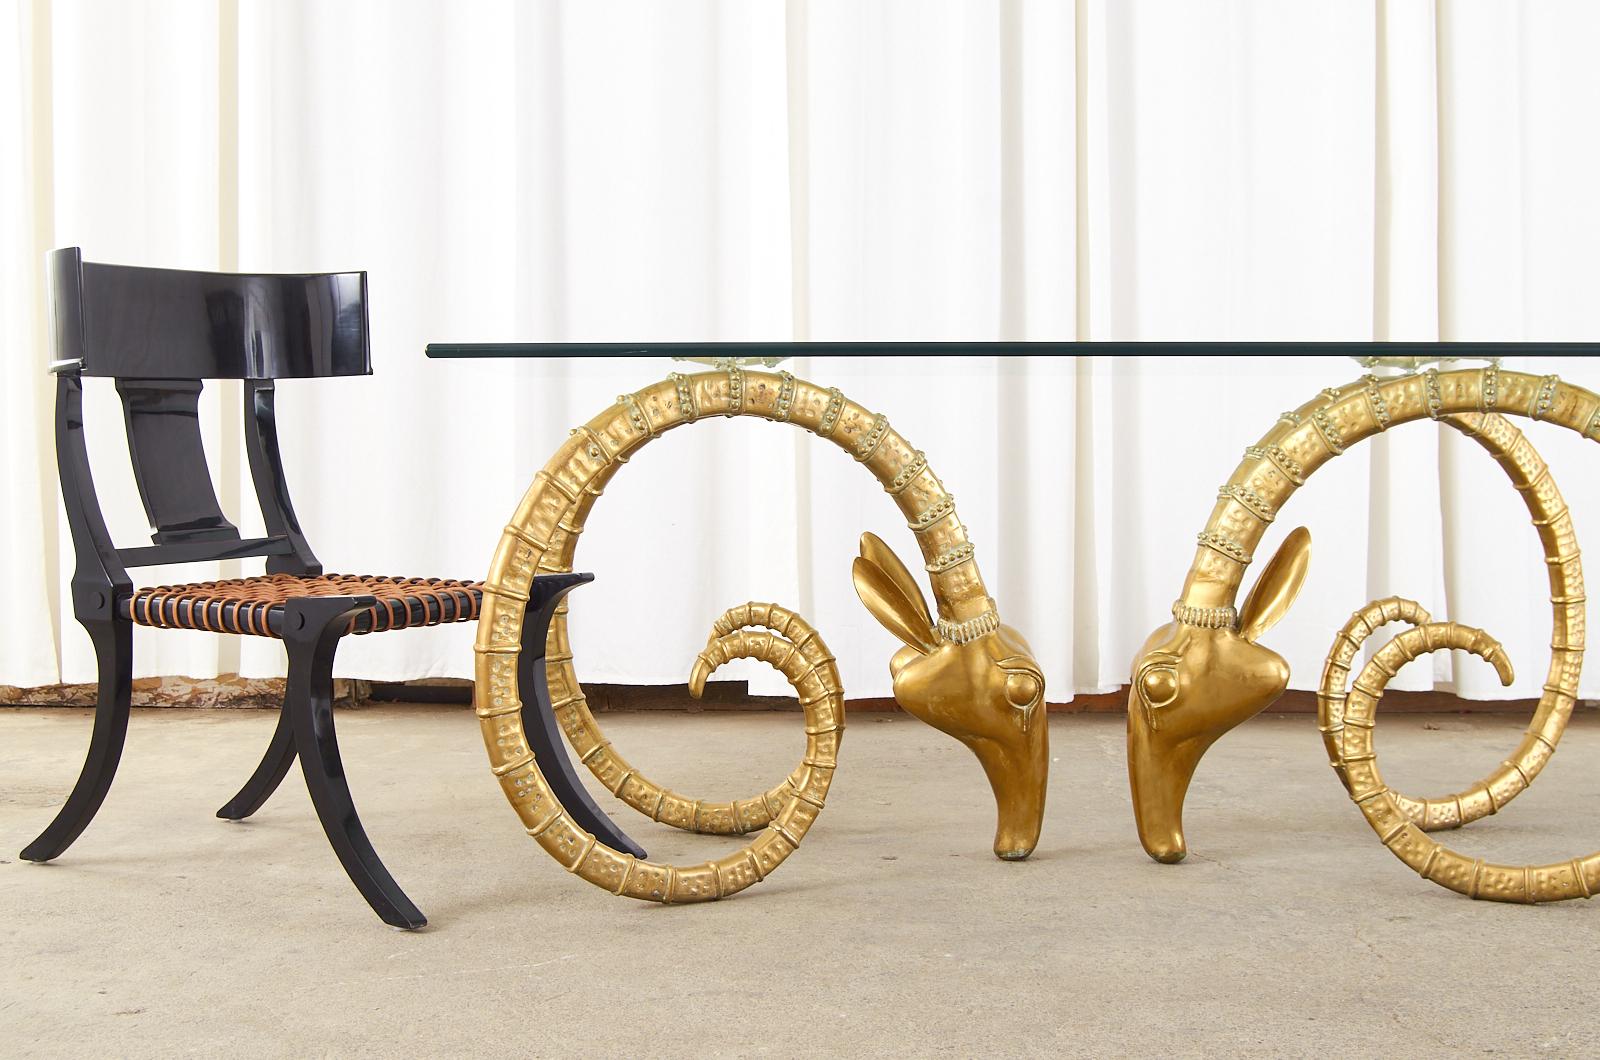 Sculptural French brass dining table attributed to Alain Chervet featuring a pair of large ram's head ibex forms. Remarkable size gives a dramatic focal point with beautifully detailed horns. Topped with a very thick pane of rectangular glass having